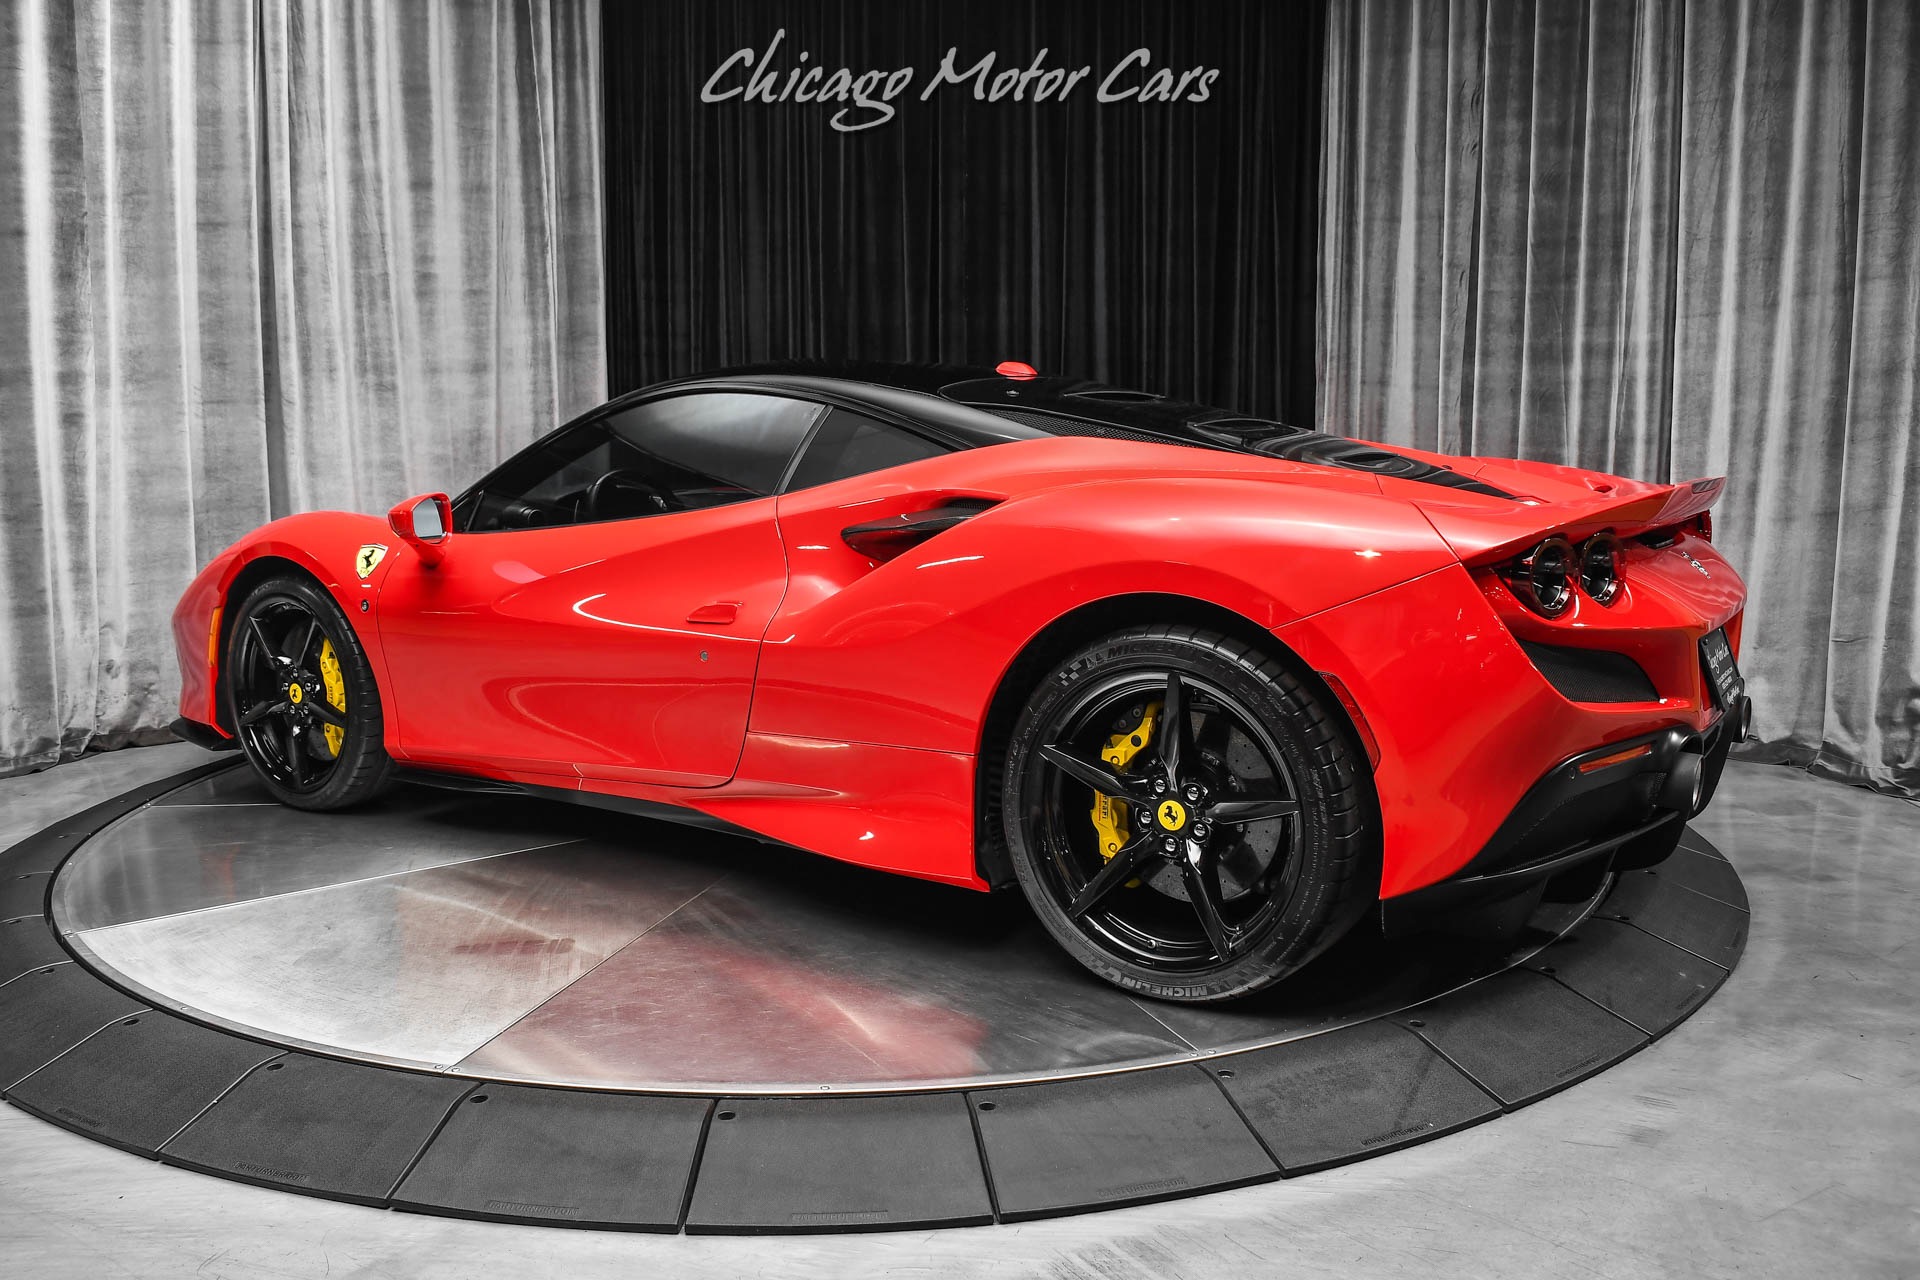 Used-2020-Ferrari-F8-Tributo-Timeless-Rosso-Corsa-Front-Lift-710hp-Only-6K-Miles